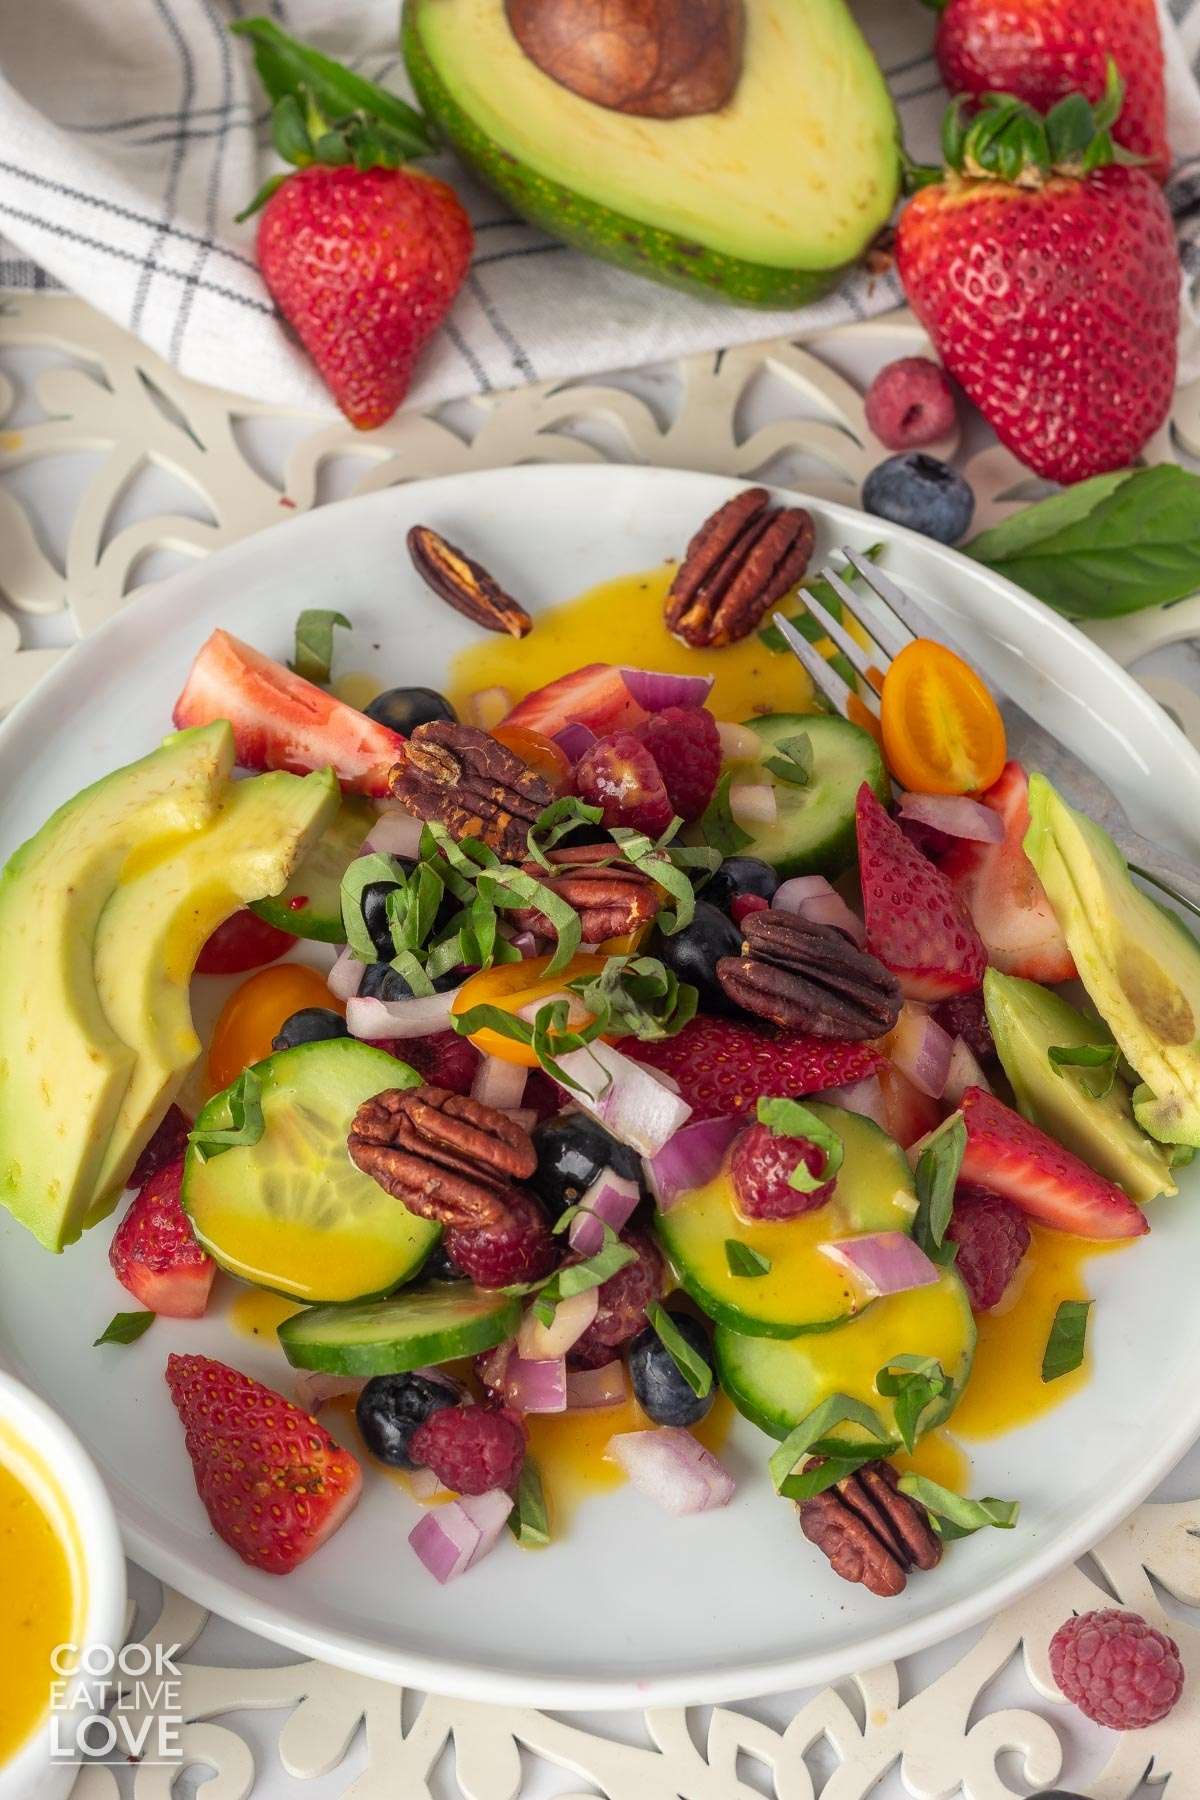 Summer berry salad in a white bowl served on a table with a half an avocado and whole berries.